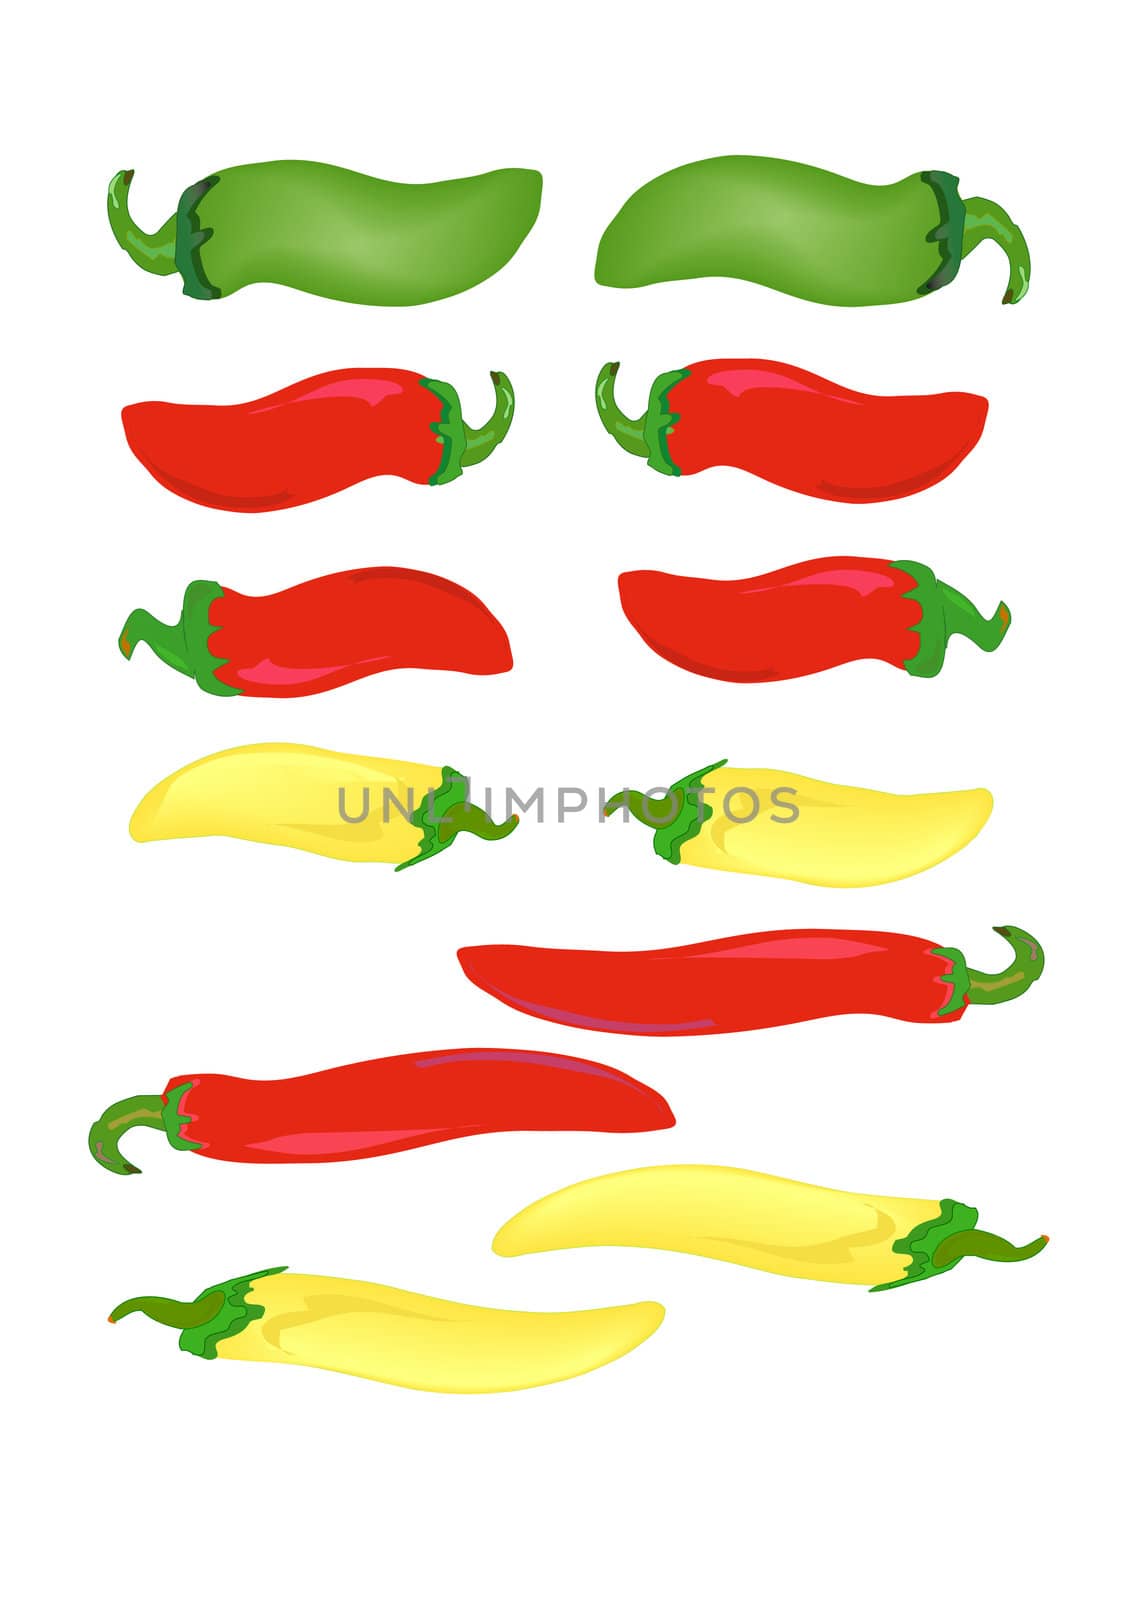 Hand drawn illustration of various hot peppers.